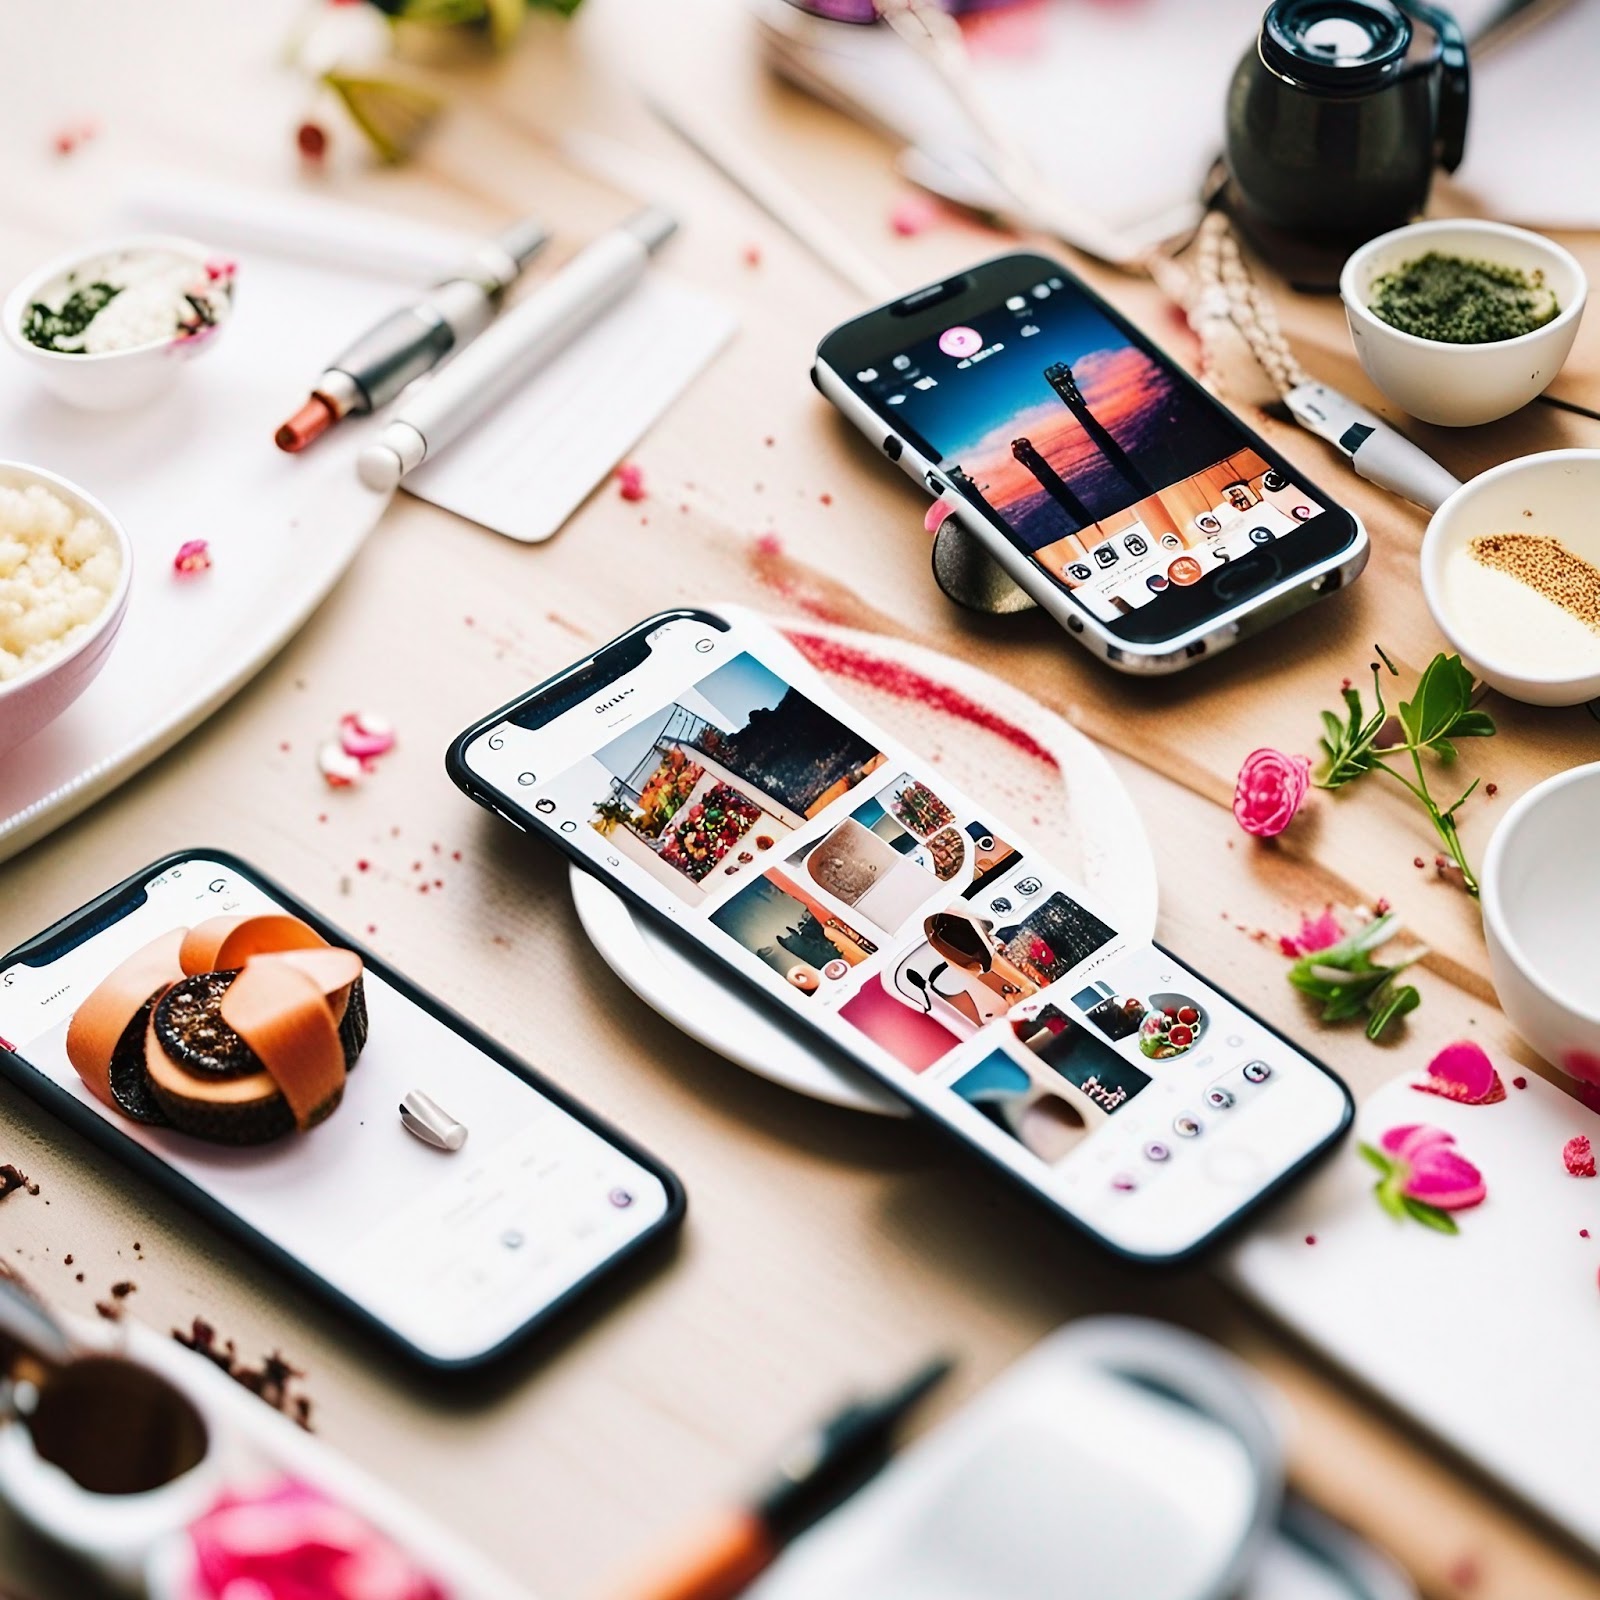 "Infuse innovation and vibrancy into your Instagram feed with our selection of captivating post ideas. Distinguish yourself amidst the digital noise, foster meaningful engagement, and recalibrate your Instagram's appeal."